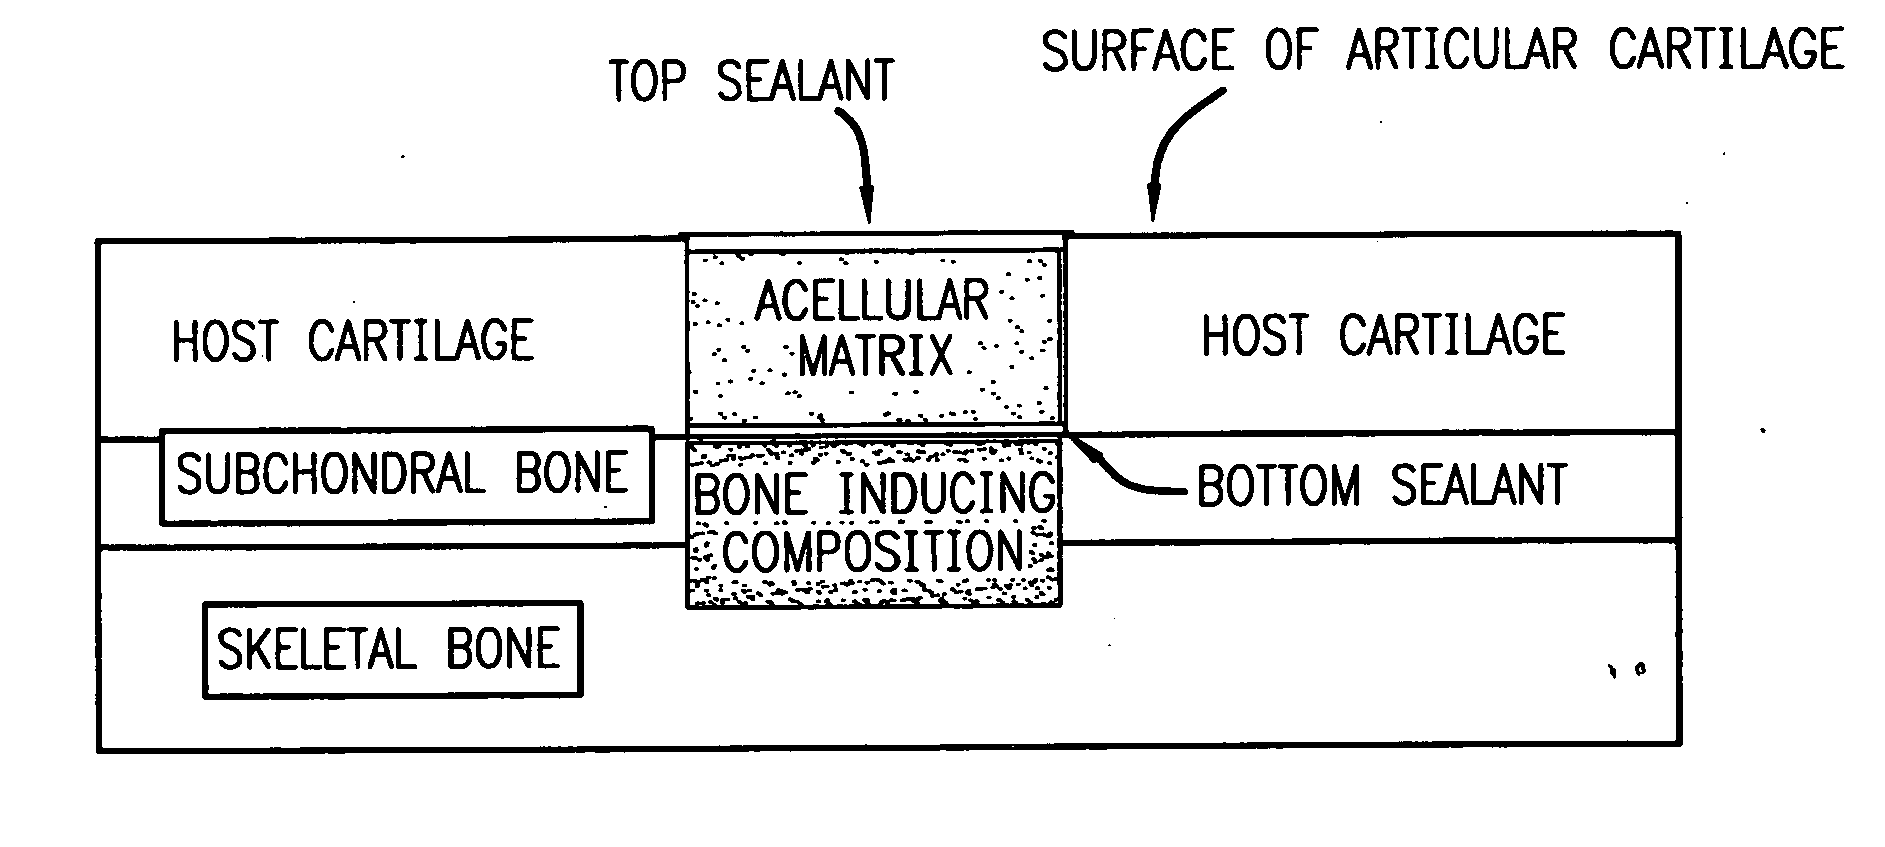 Acellular matrix implants for treatment of articular cartilage, bone or osteochondral defects and injuries and method for use thereof